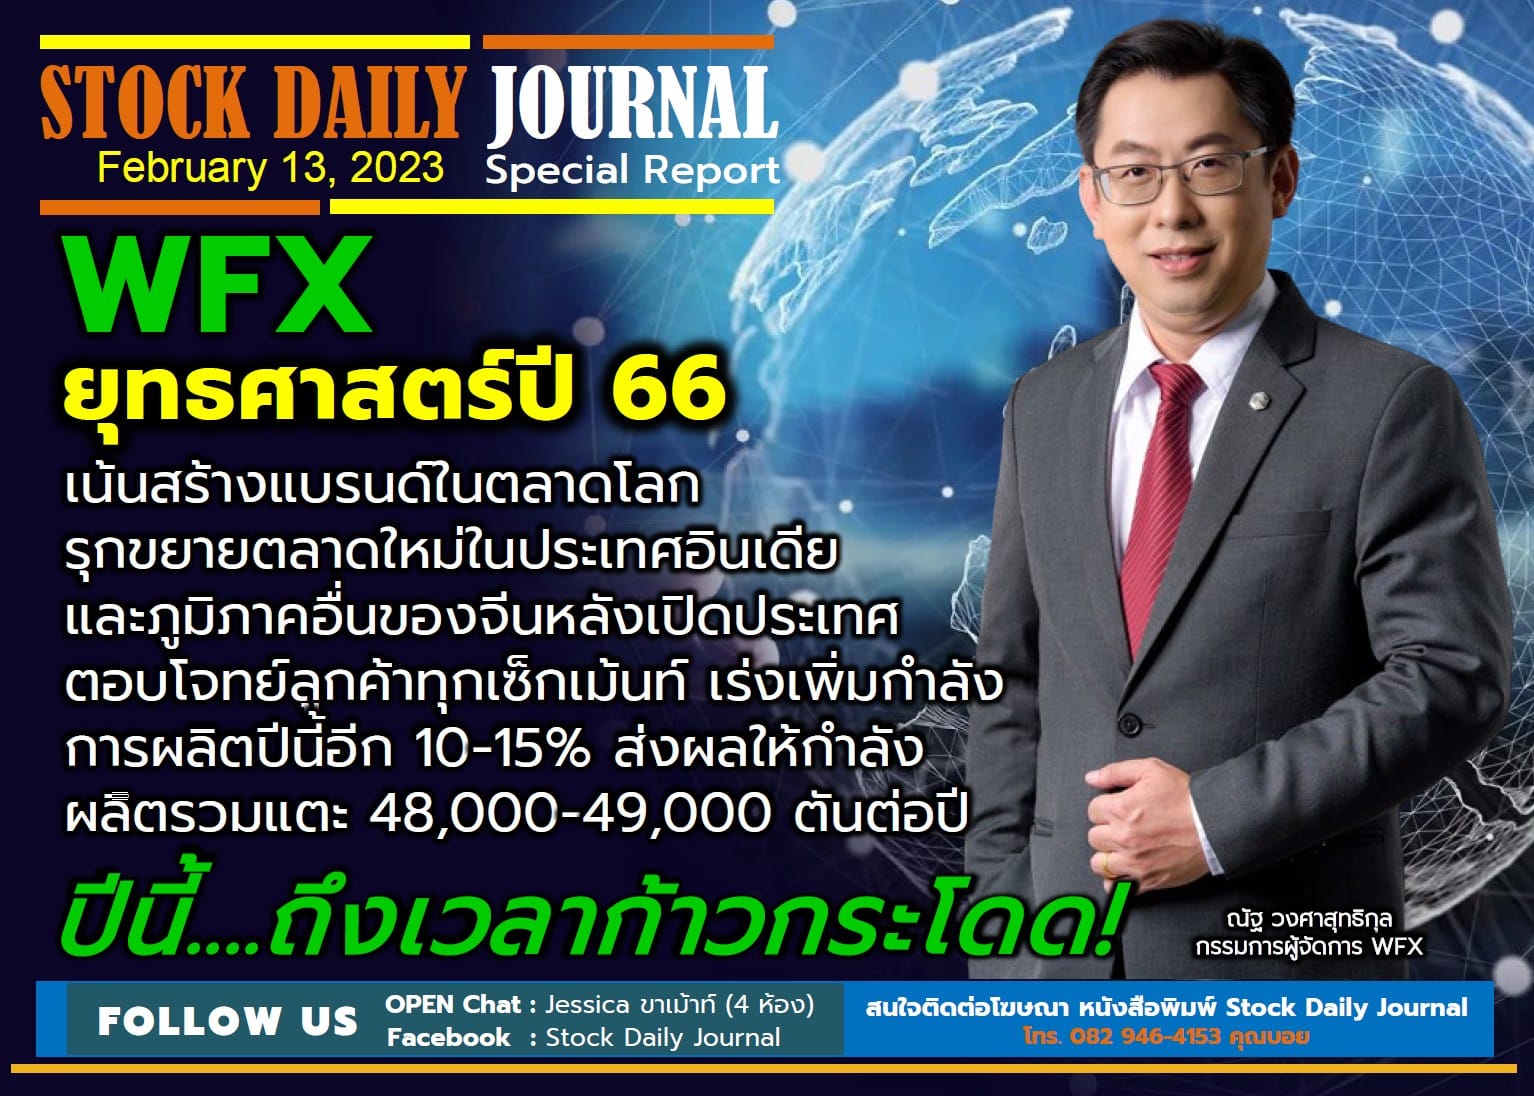 STOCK DAILY JOURNAL “Special Report : WFX”